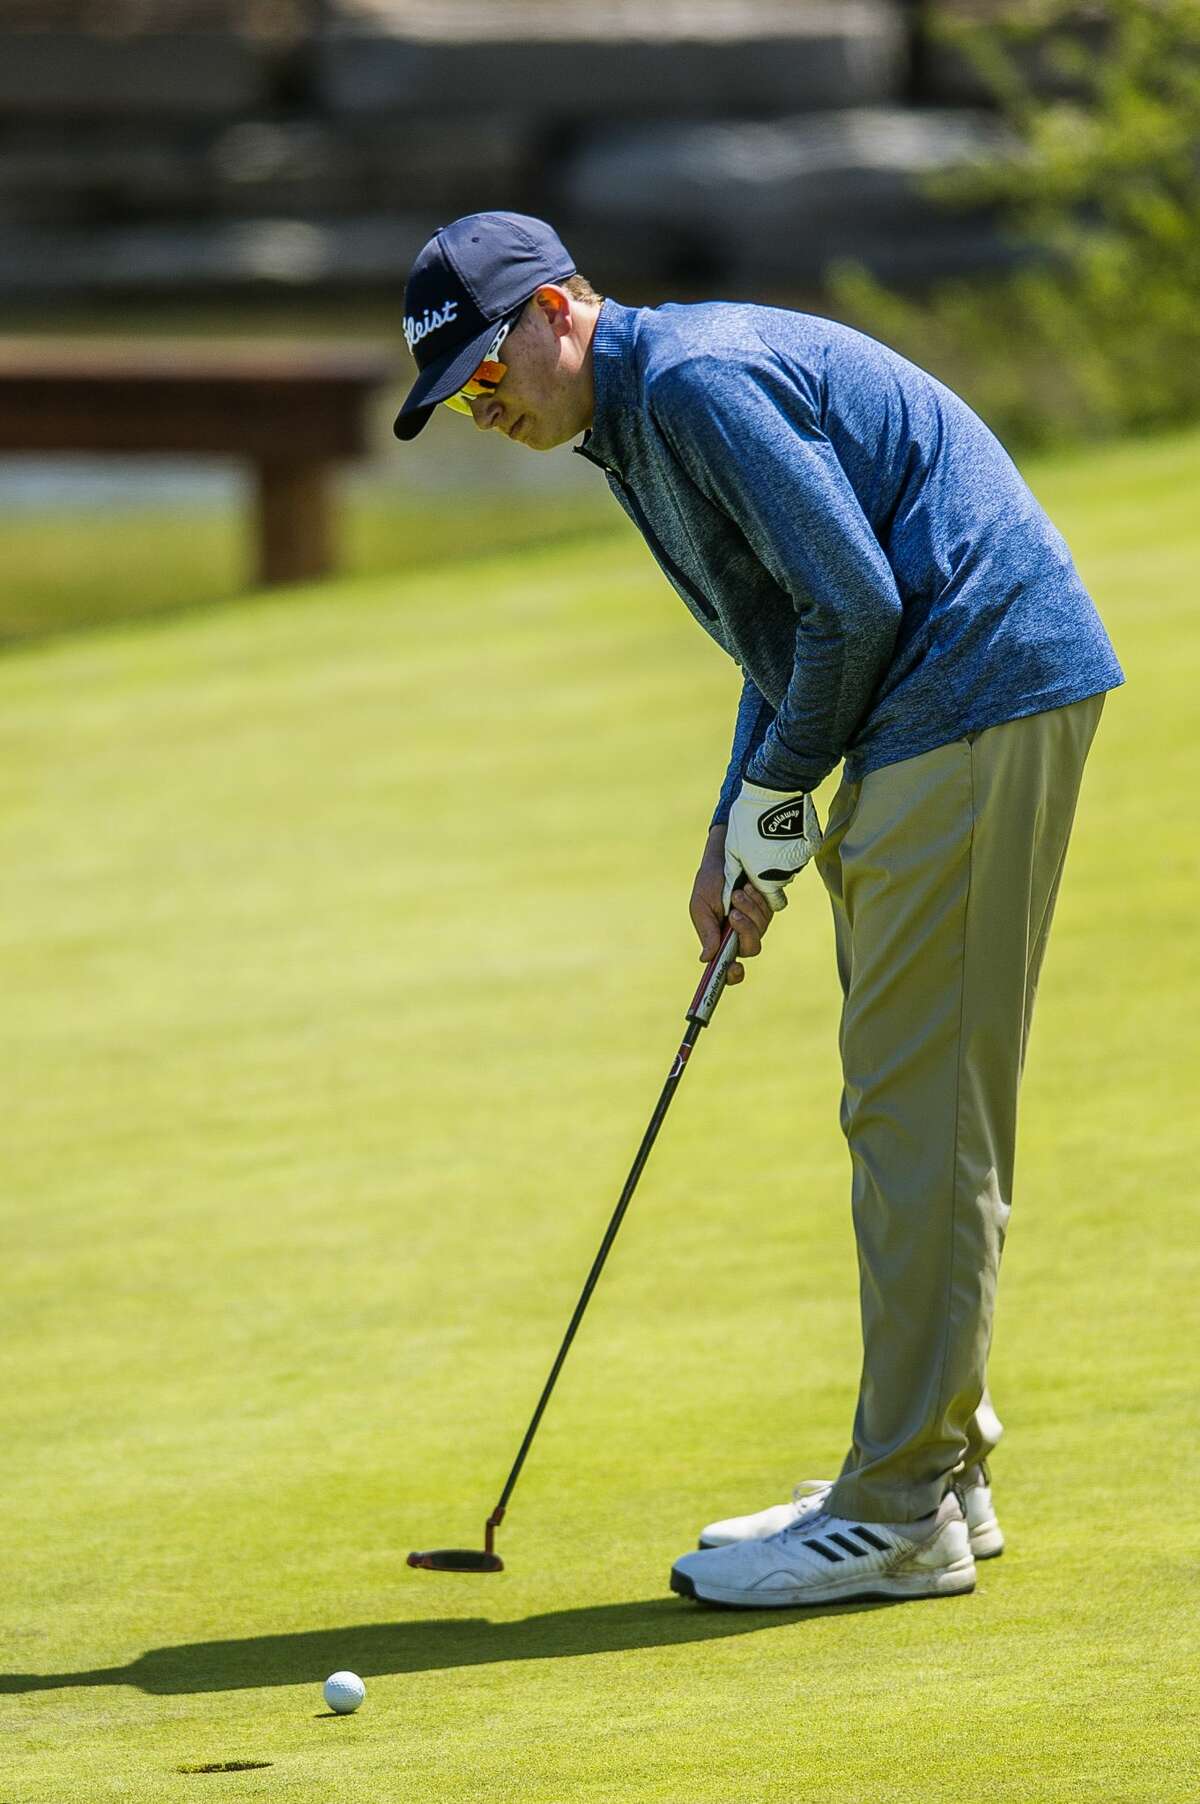 Midland's Jackson Shinske competes in the Chemical City Classic golf tournament on Monday, May 13, 2019 at the Midland Country Club. (Katy Kildee/kkildee@mdn.net)